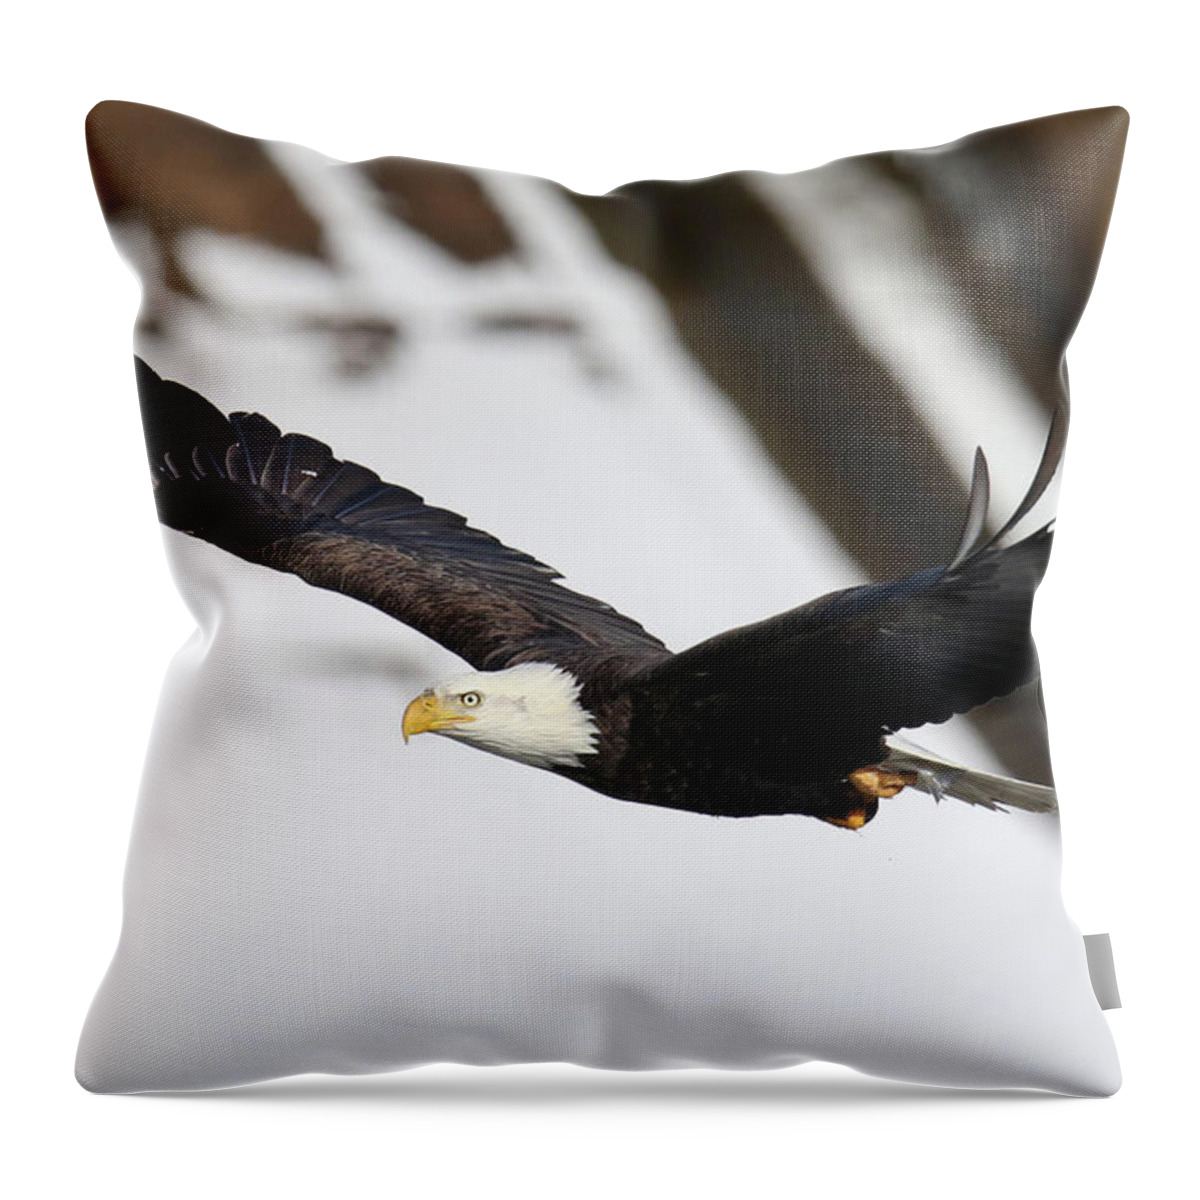 Bald Eagle Throw Pillow featuring the photograph Fly By Eagle by Brook Burling